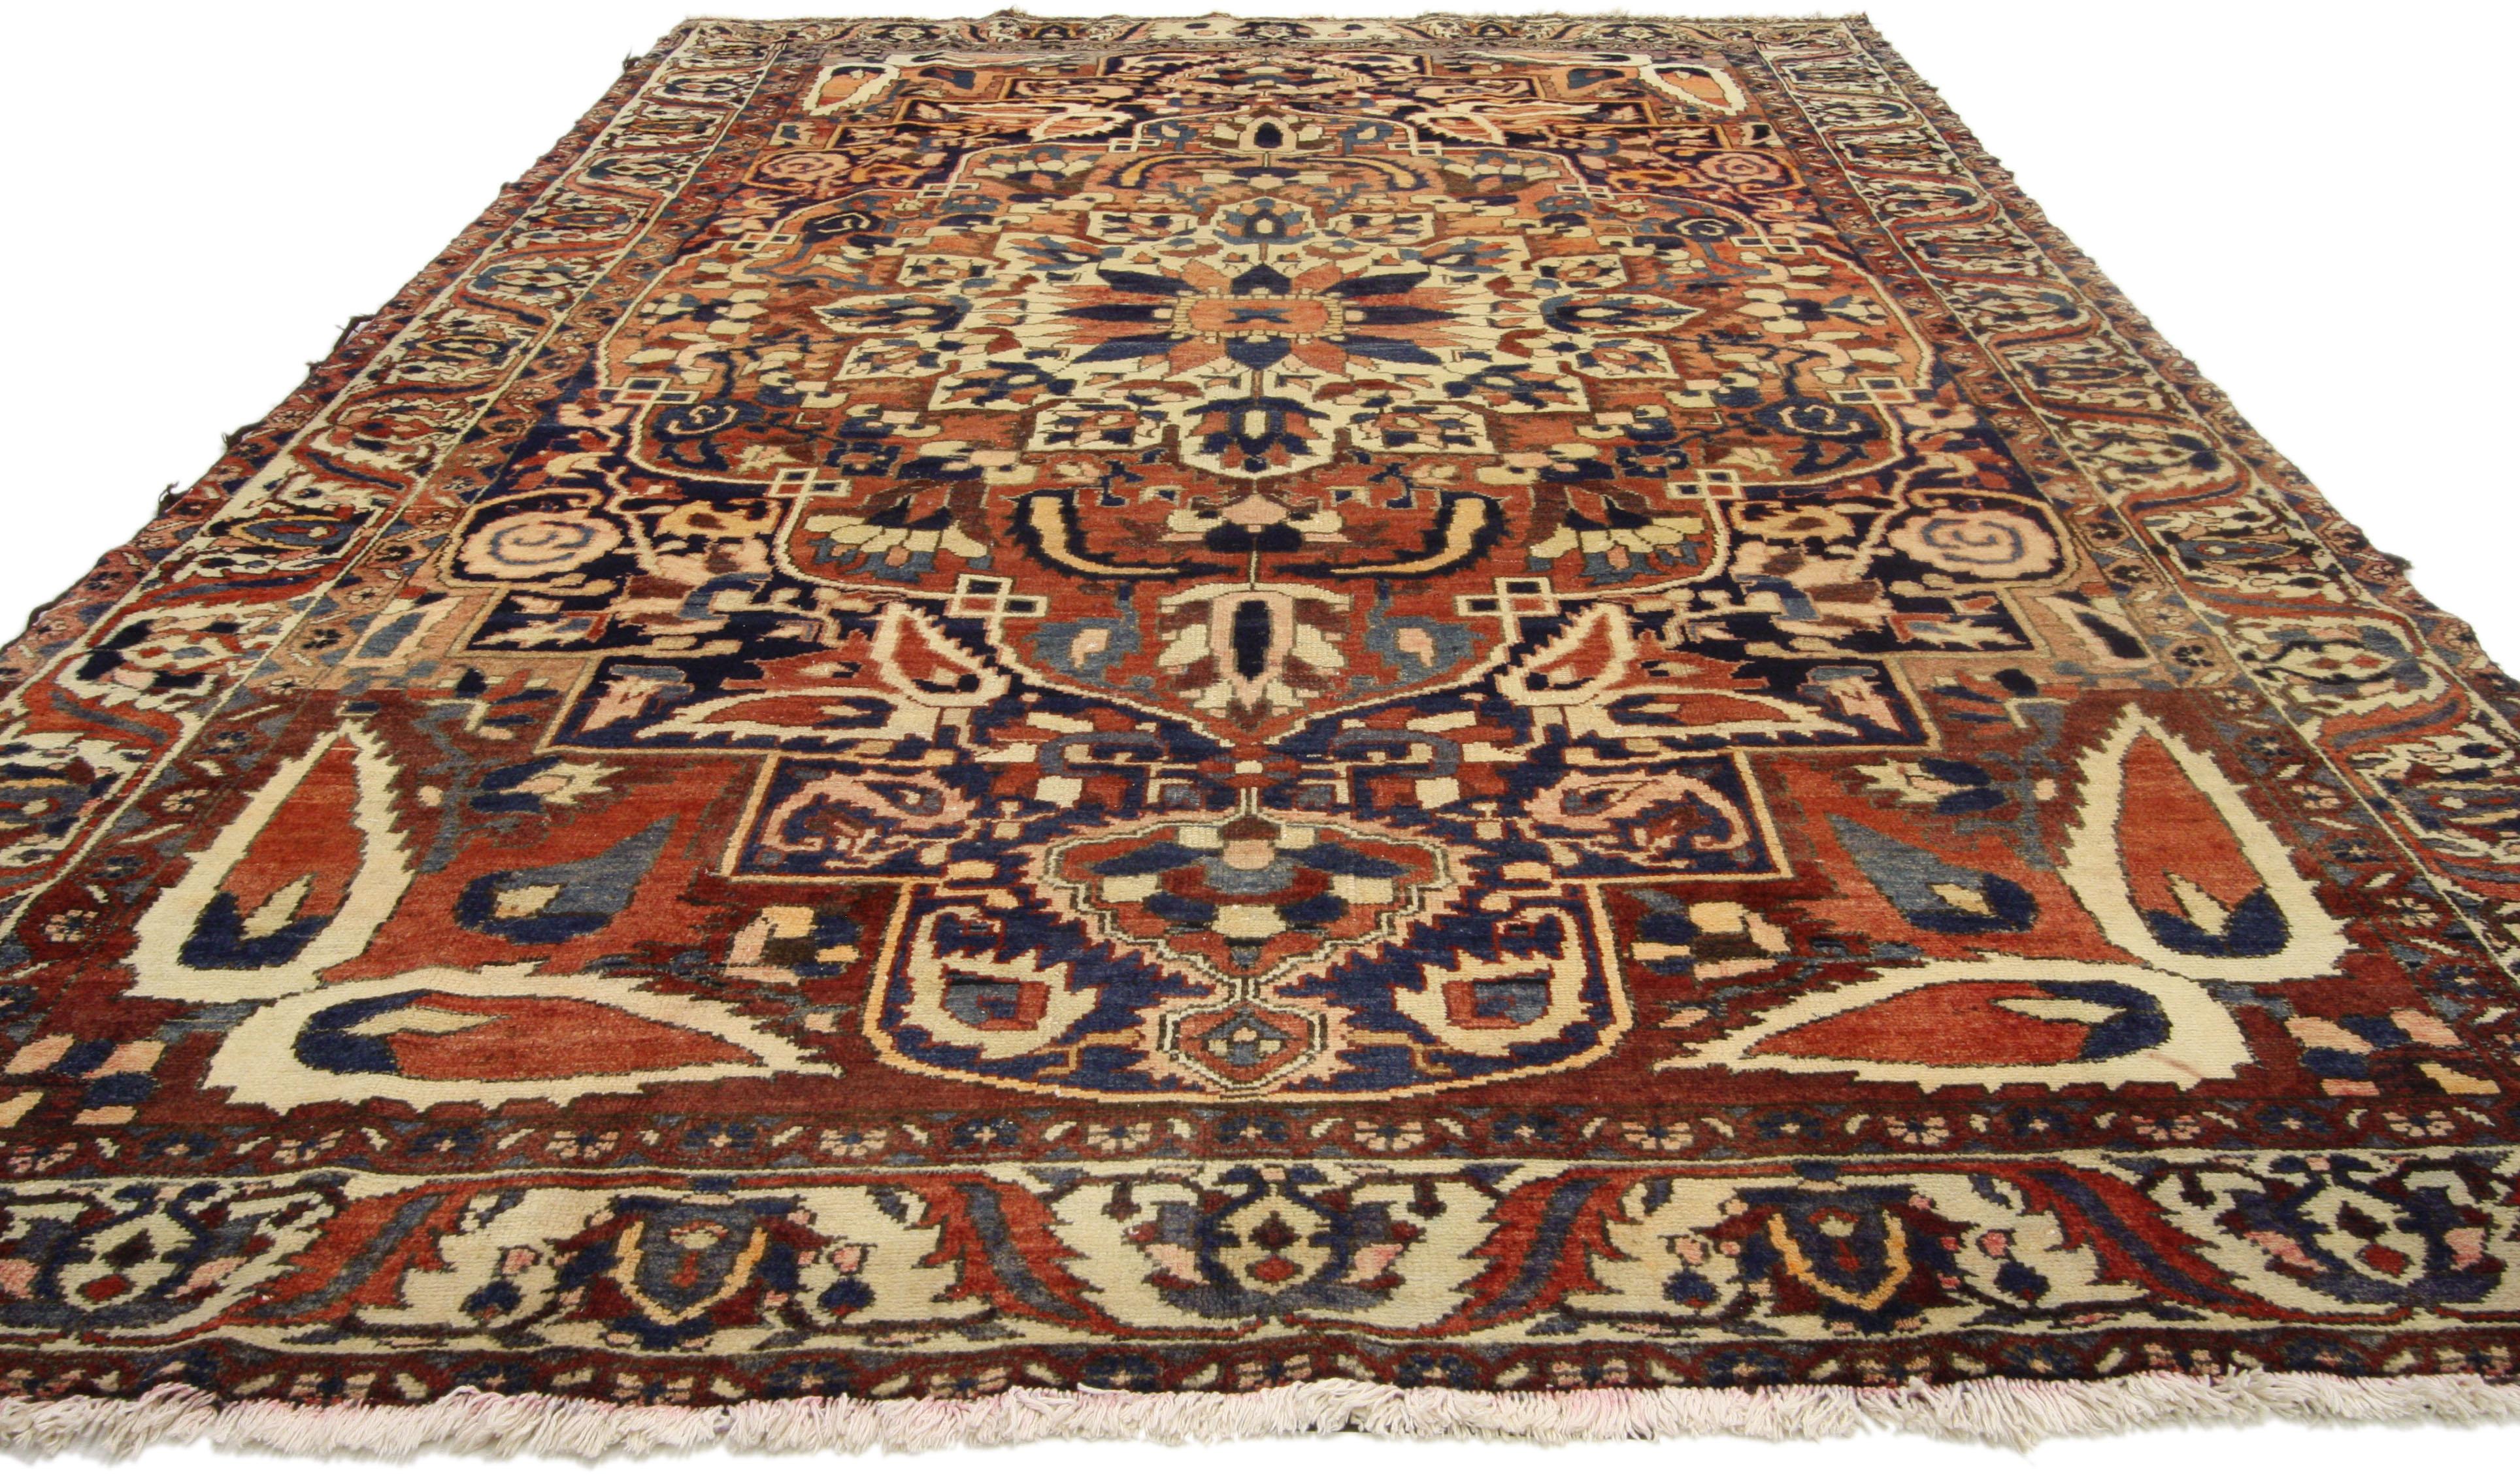 ​75264 Vintage Persian Bakhtiari Rug with Rustic Modern Style 06'08 x 10'07. This hand knotted wool vintage Persian Bakhtiari rug features a layered medallion design with an array of stylized floral motifs. The oversized scalloped main medallion,